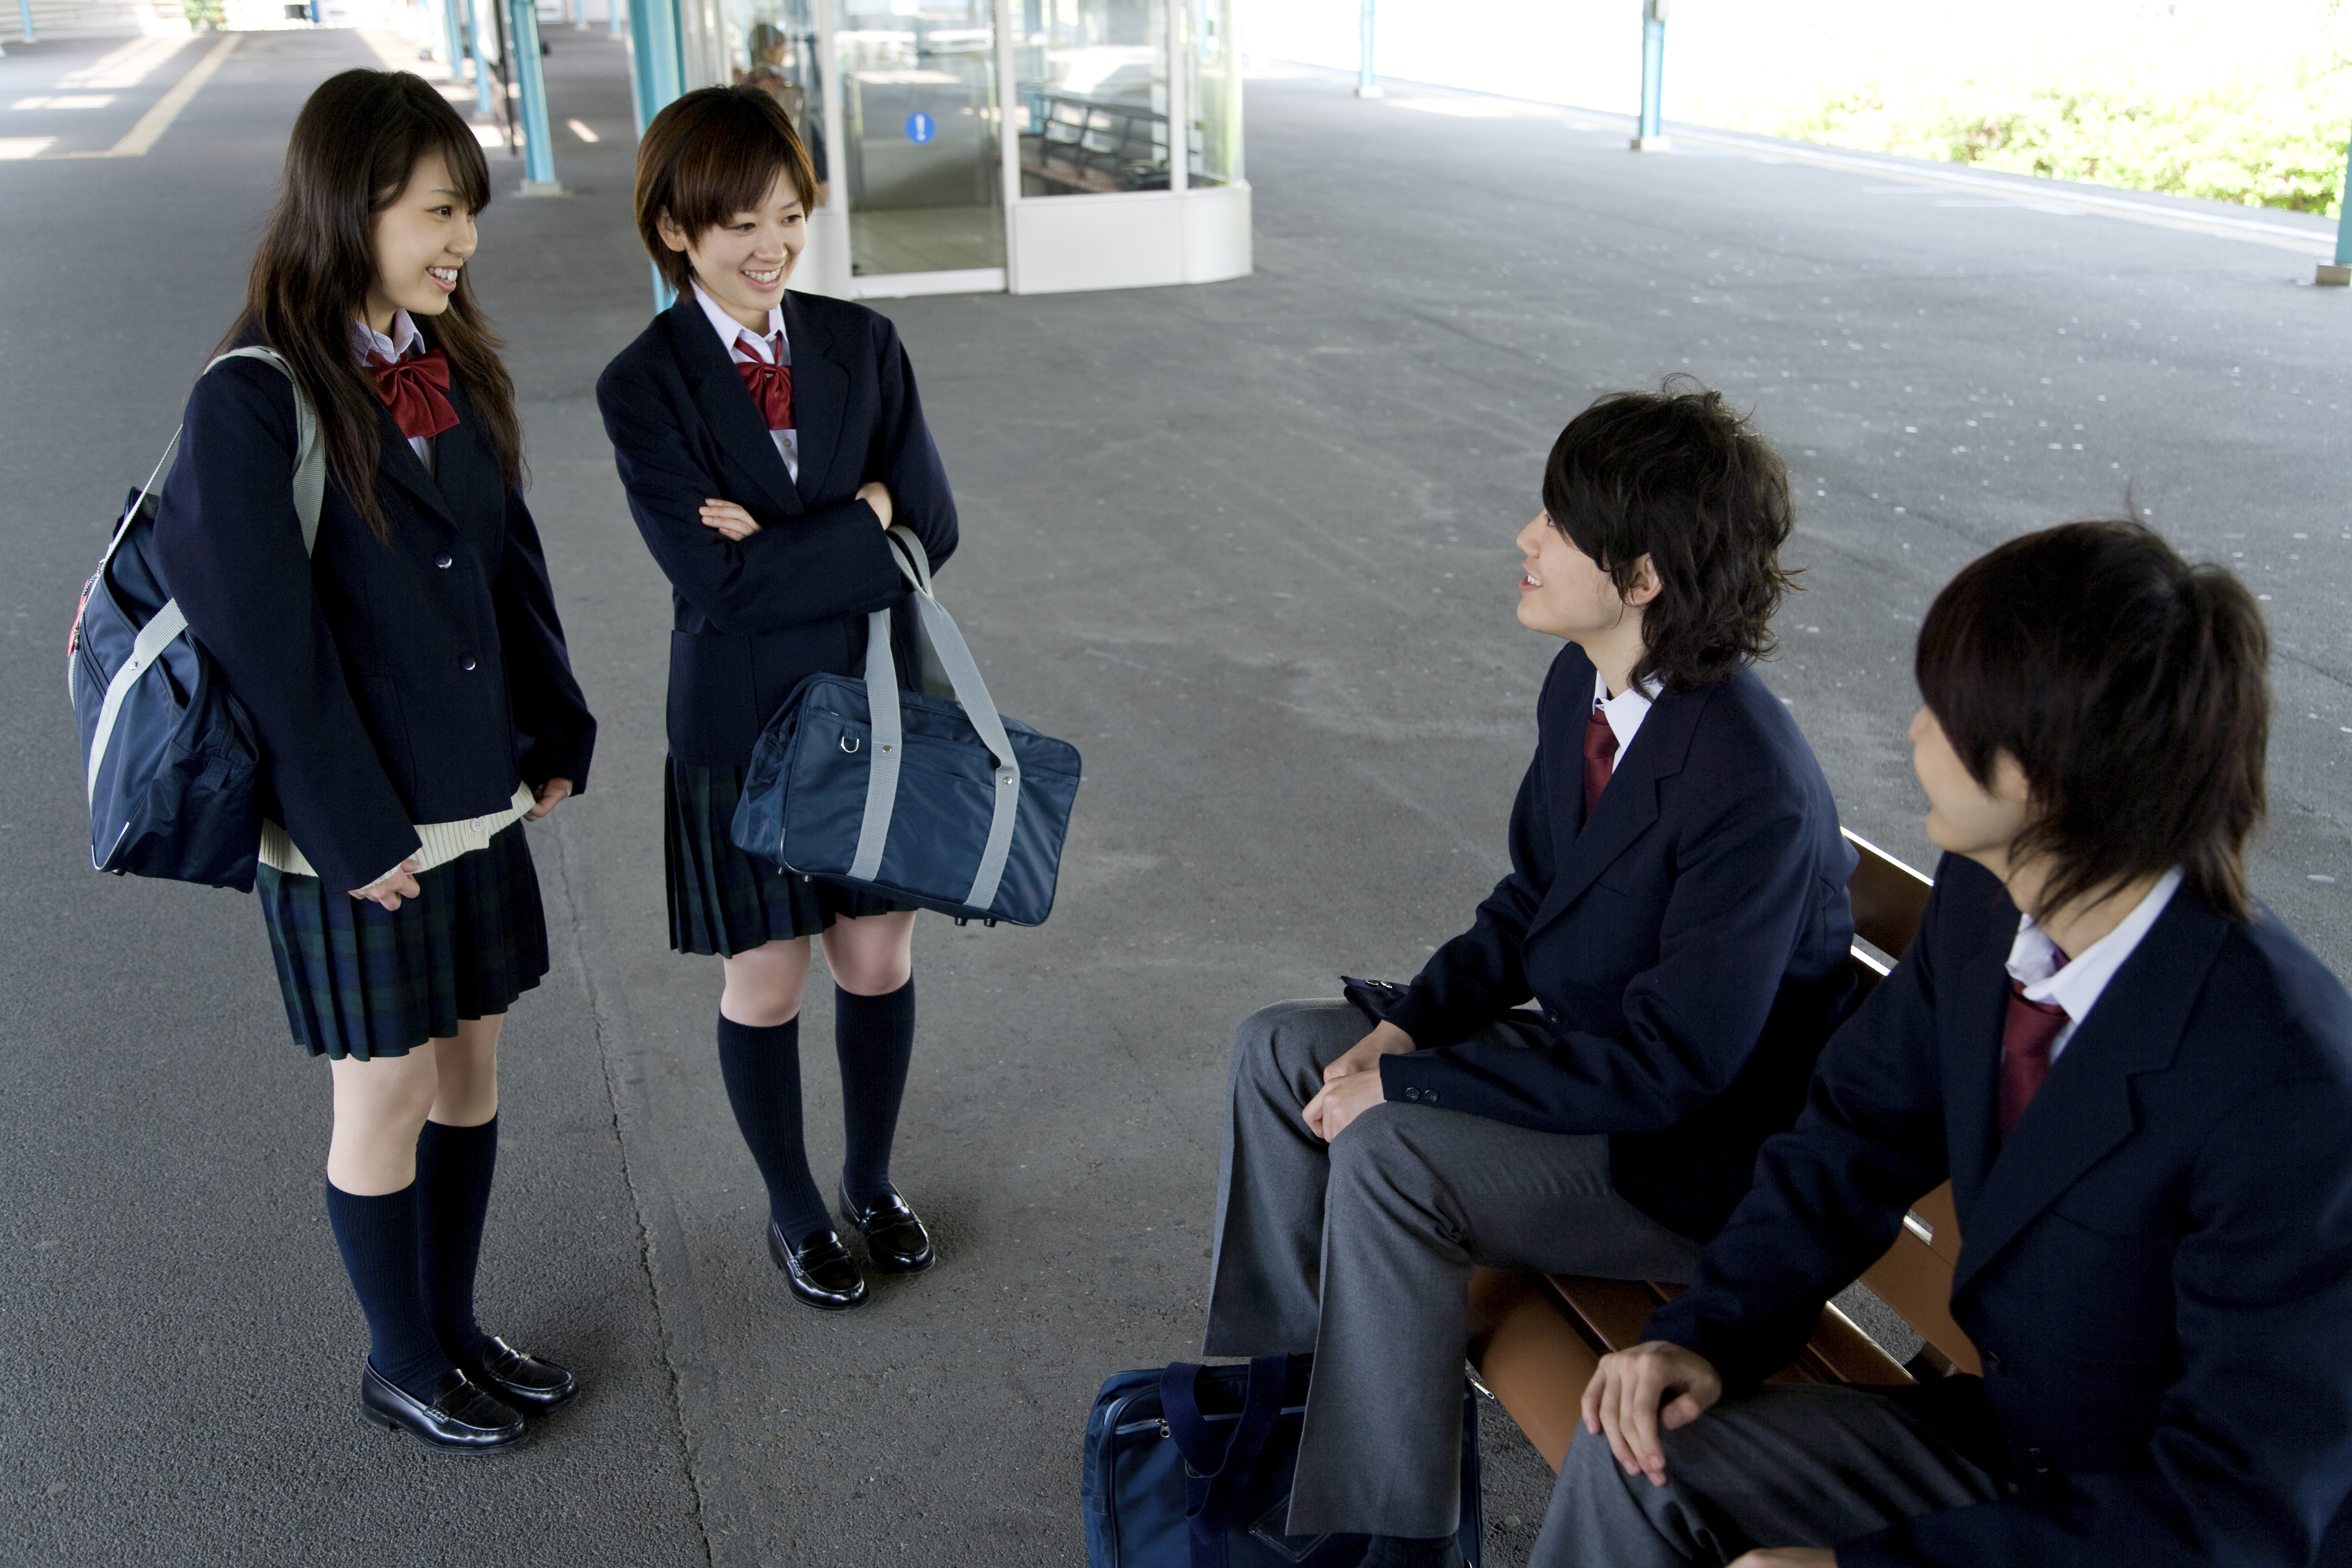 Sensación Acostumbrarse a influenza The changing values behind school uniforms | The Japan Times